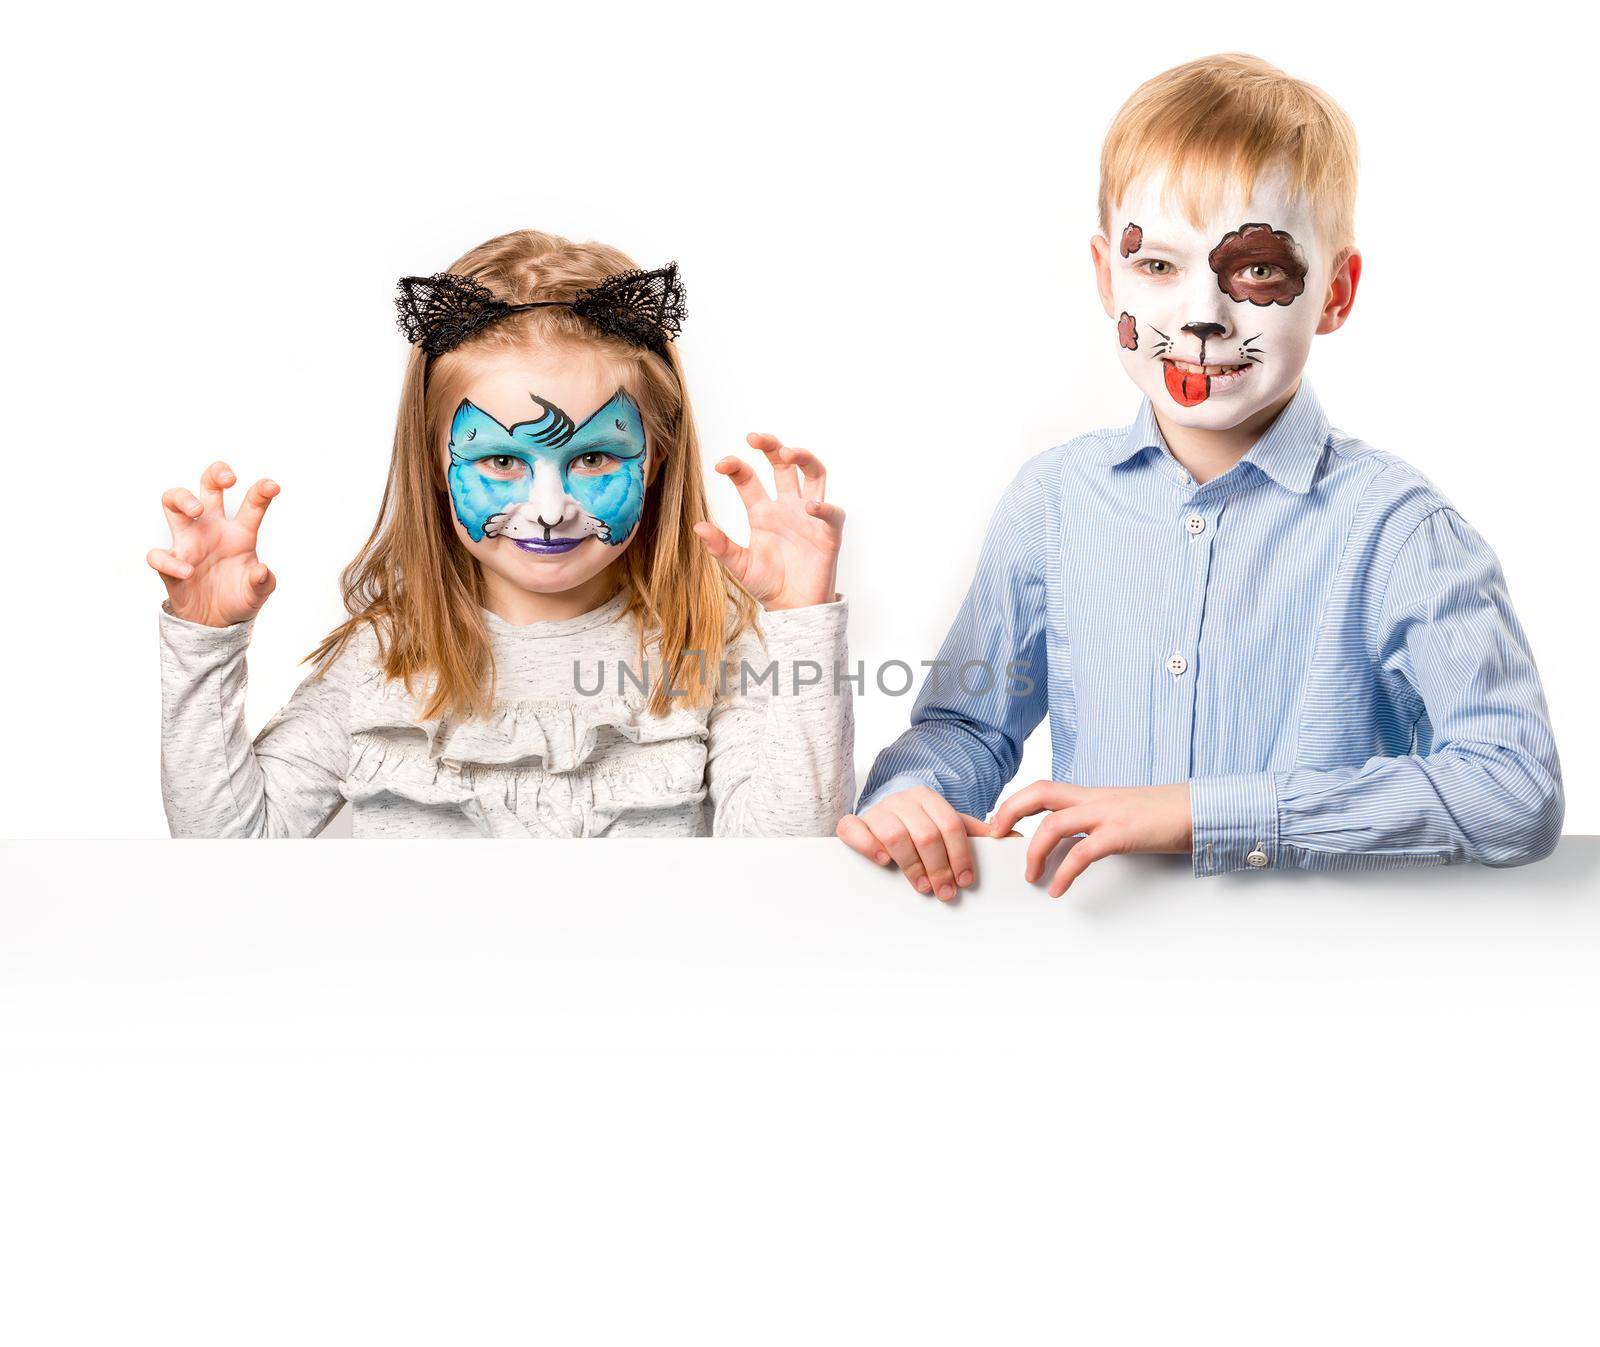 Boy and girl with face art on white background by tan4ikk1